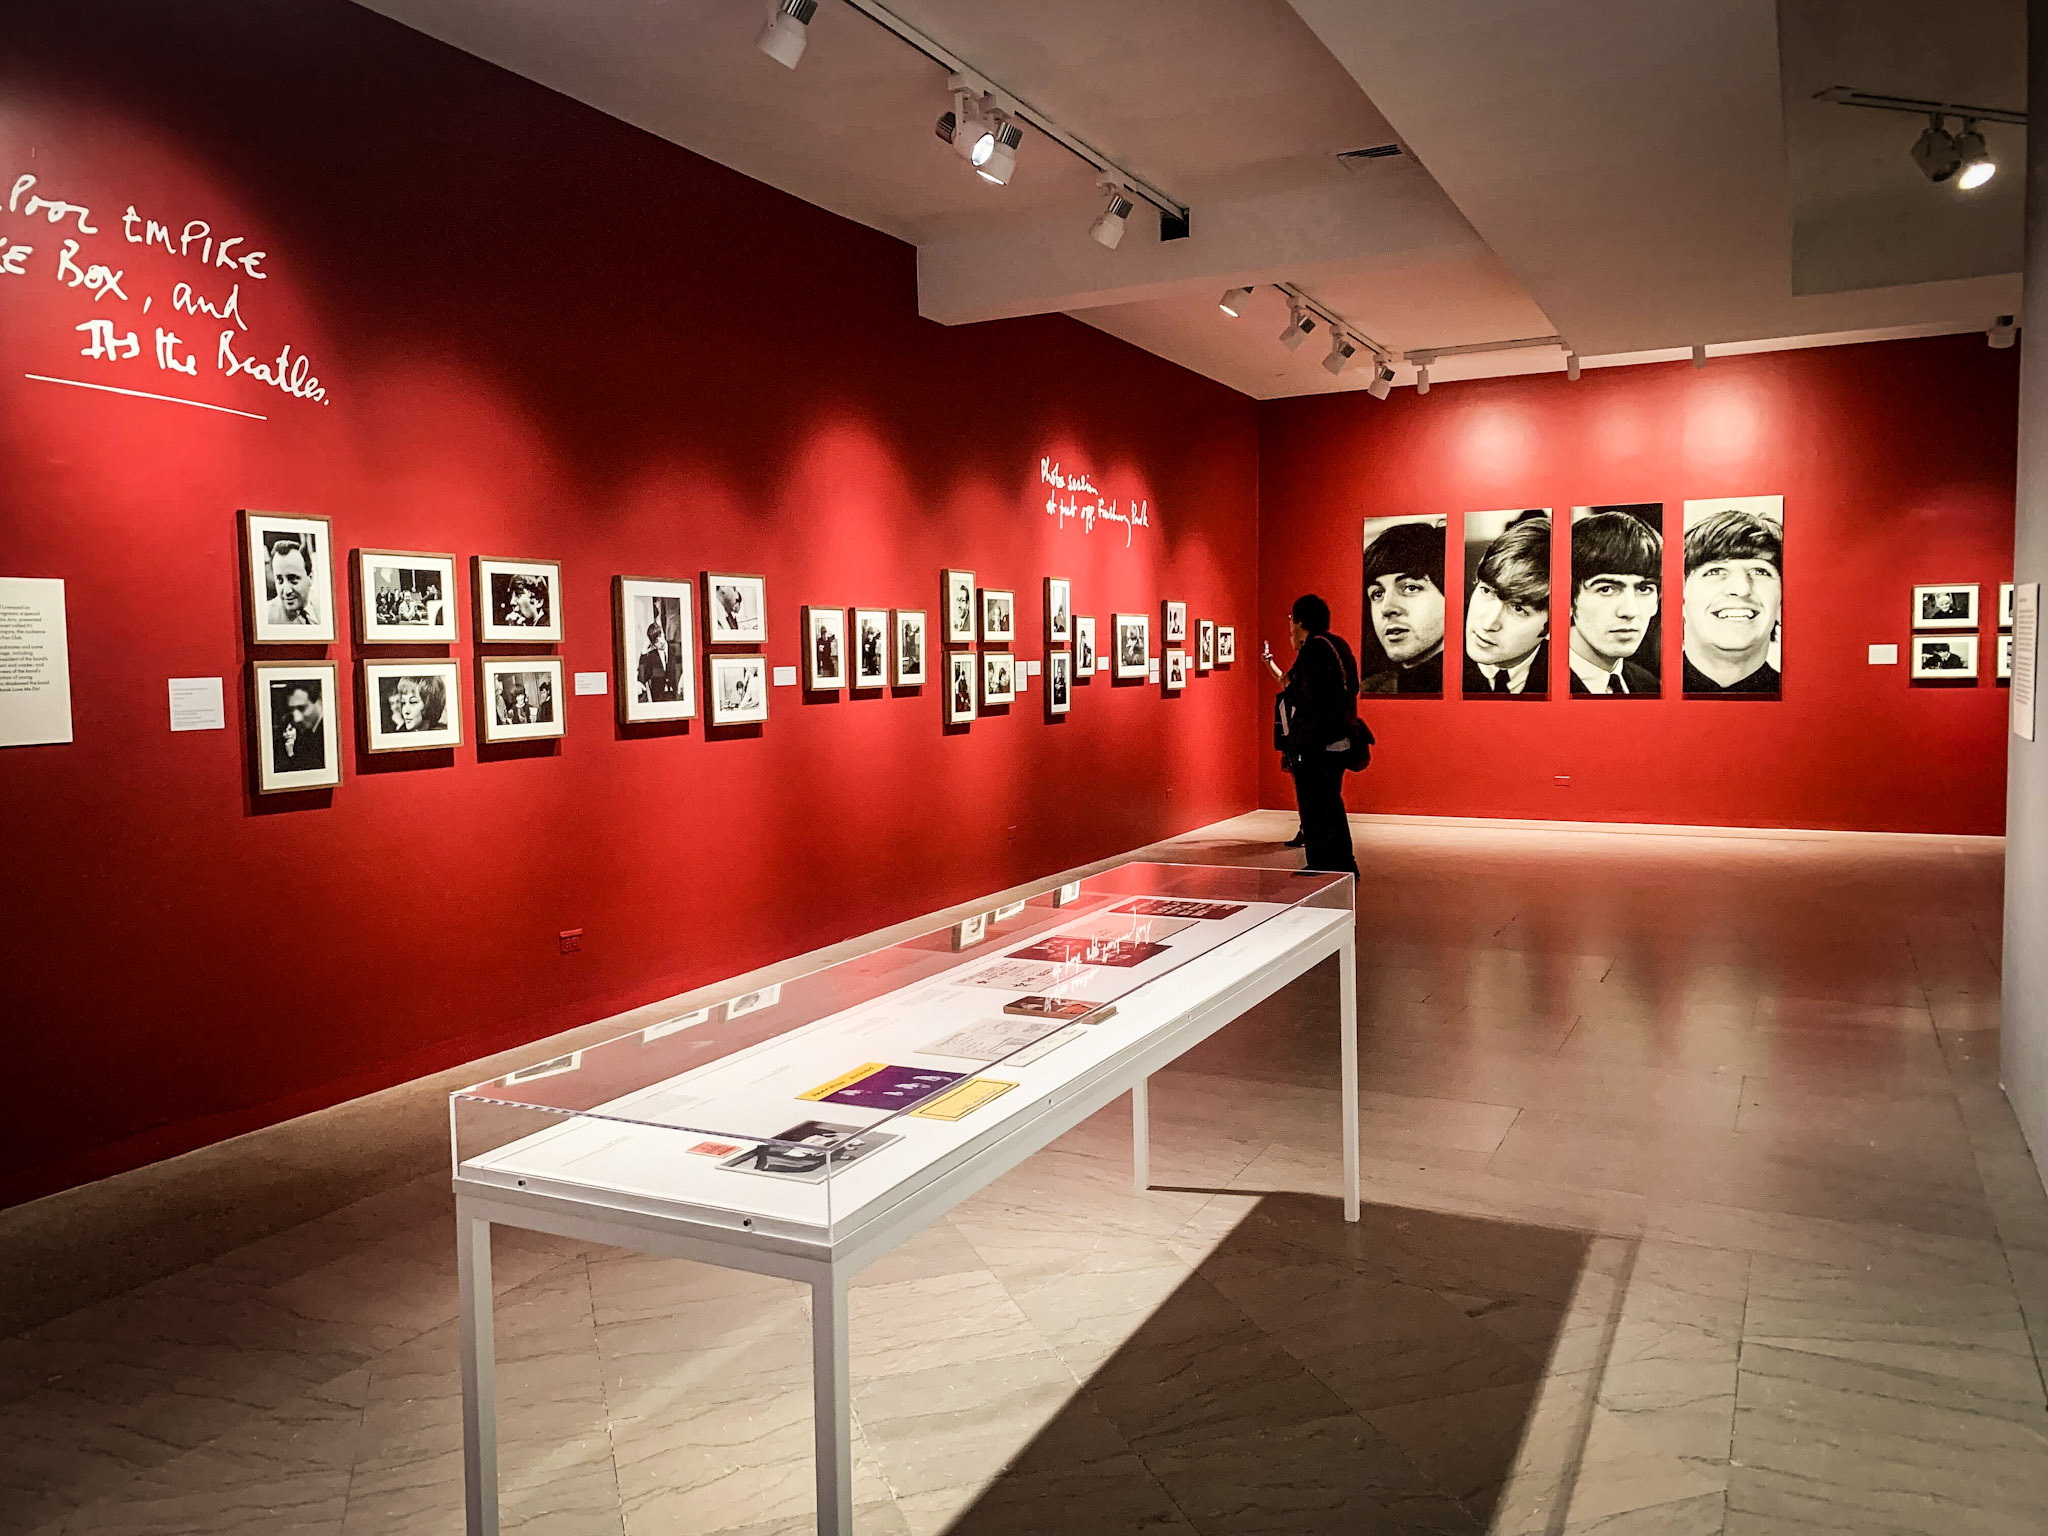 A first look at the Paul McCartney photography exhibit at the Brooklyn Museum